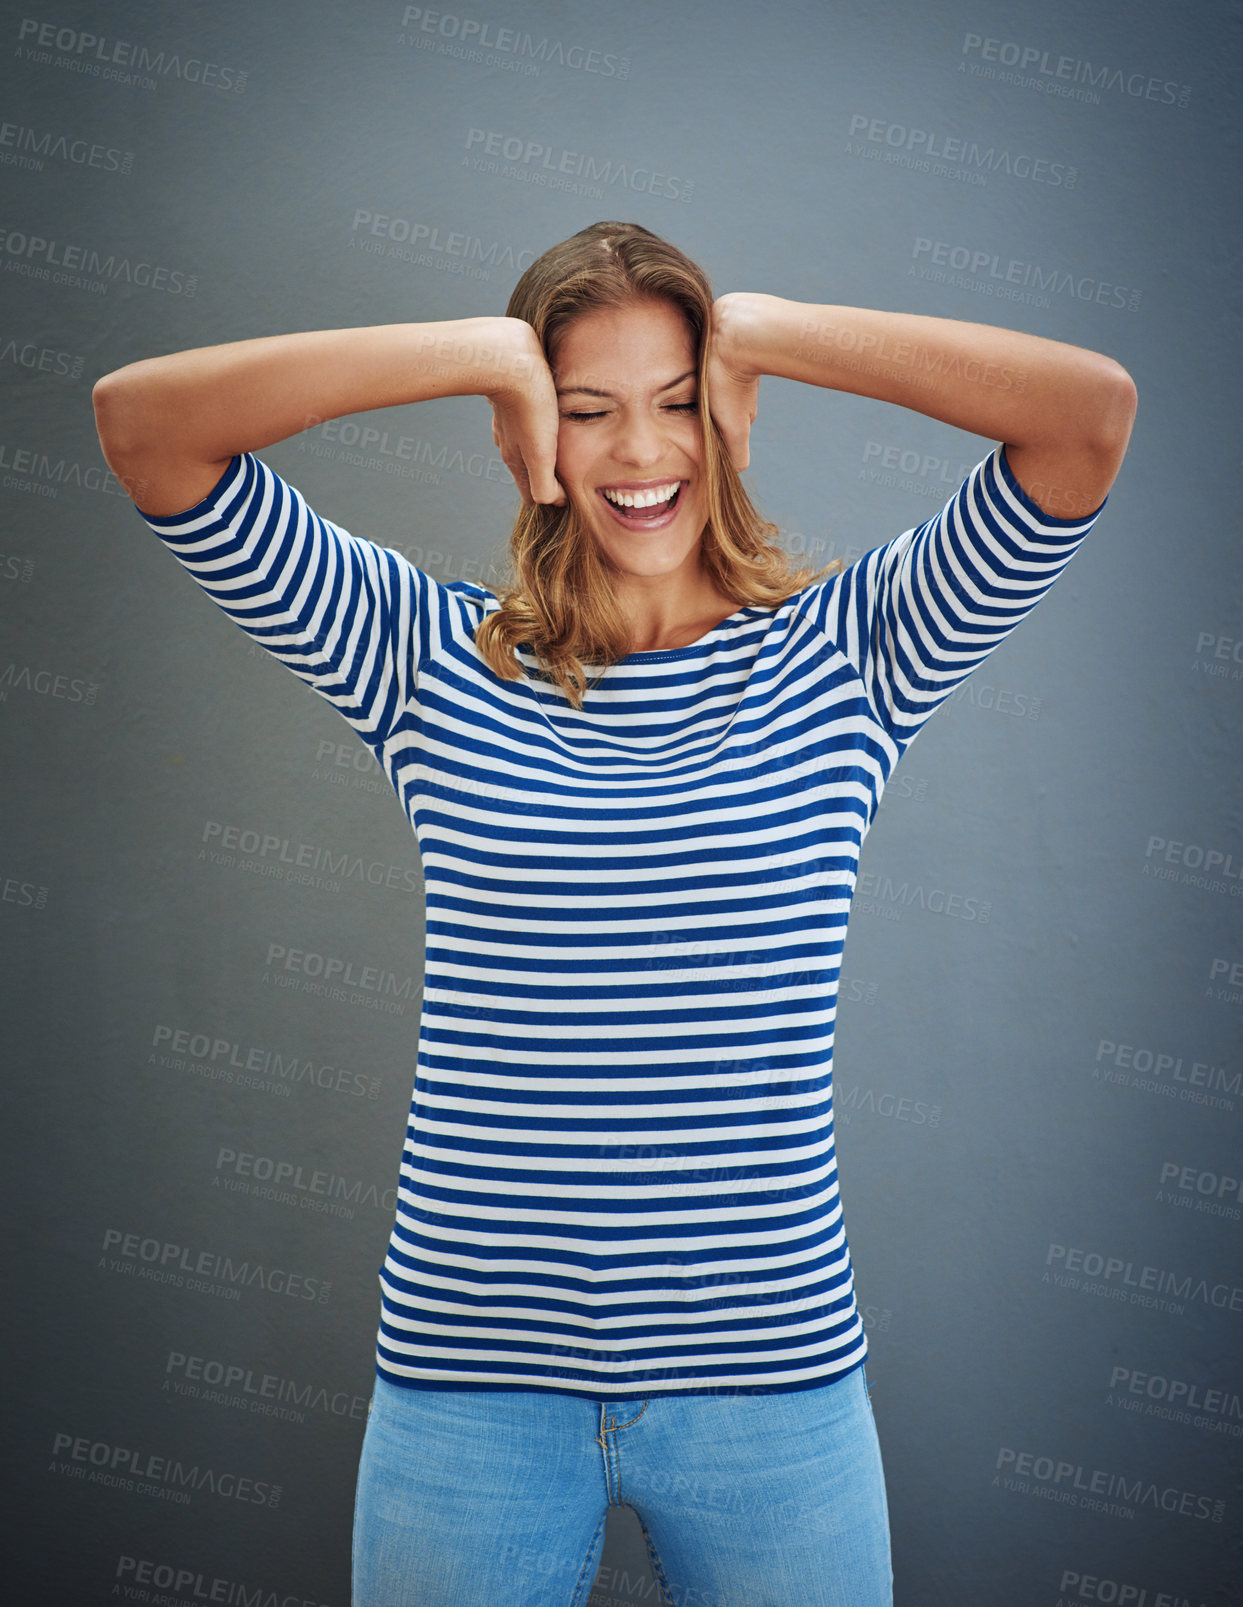 Buy stock photo Studio shot of a young woman covering her ears against a gray background